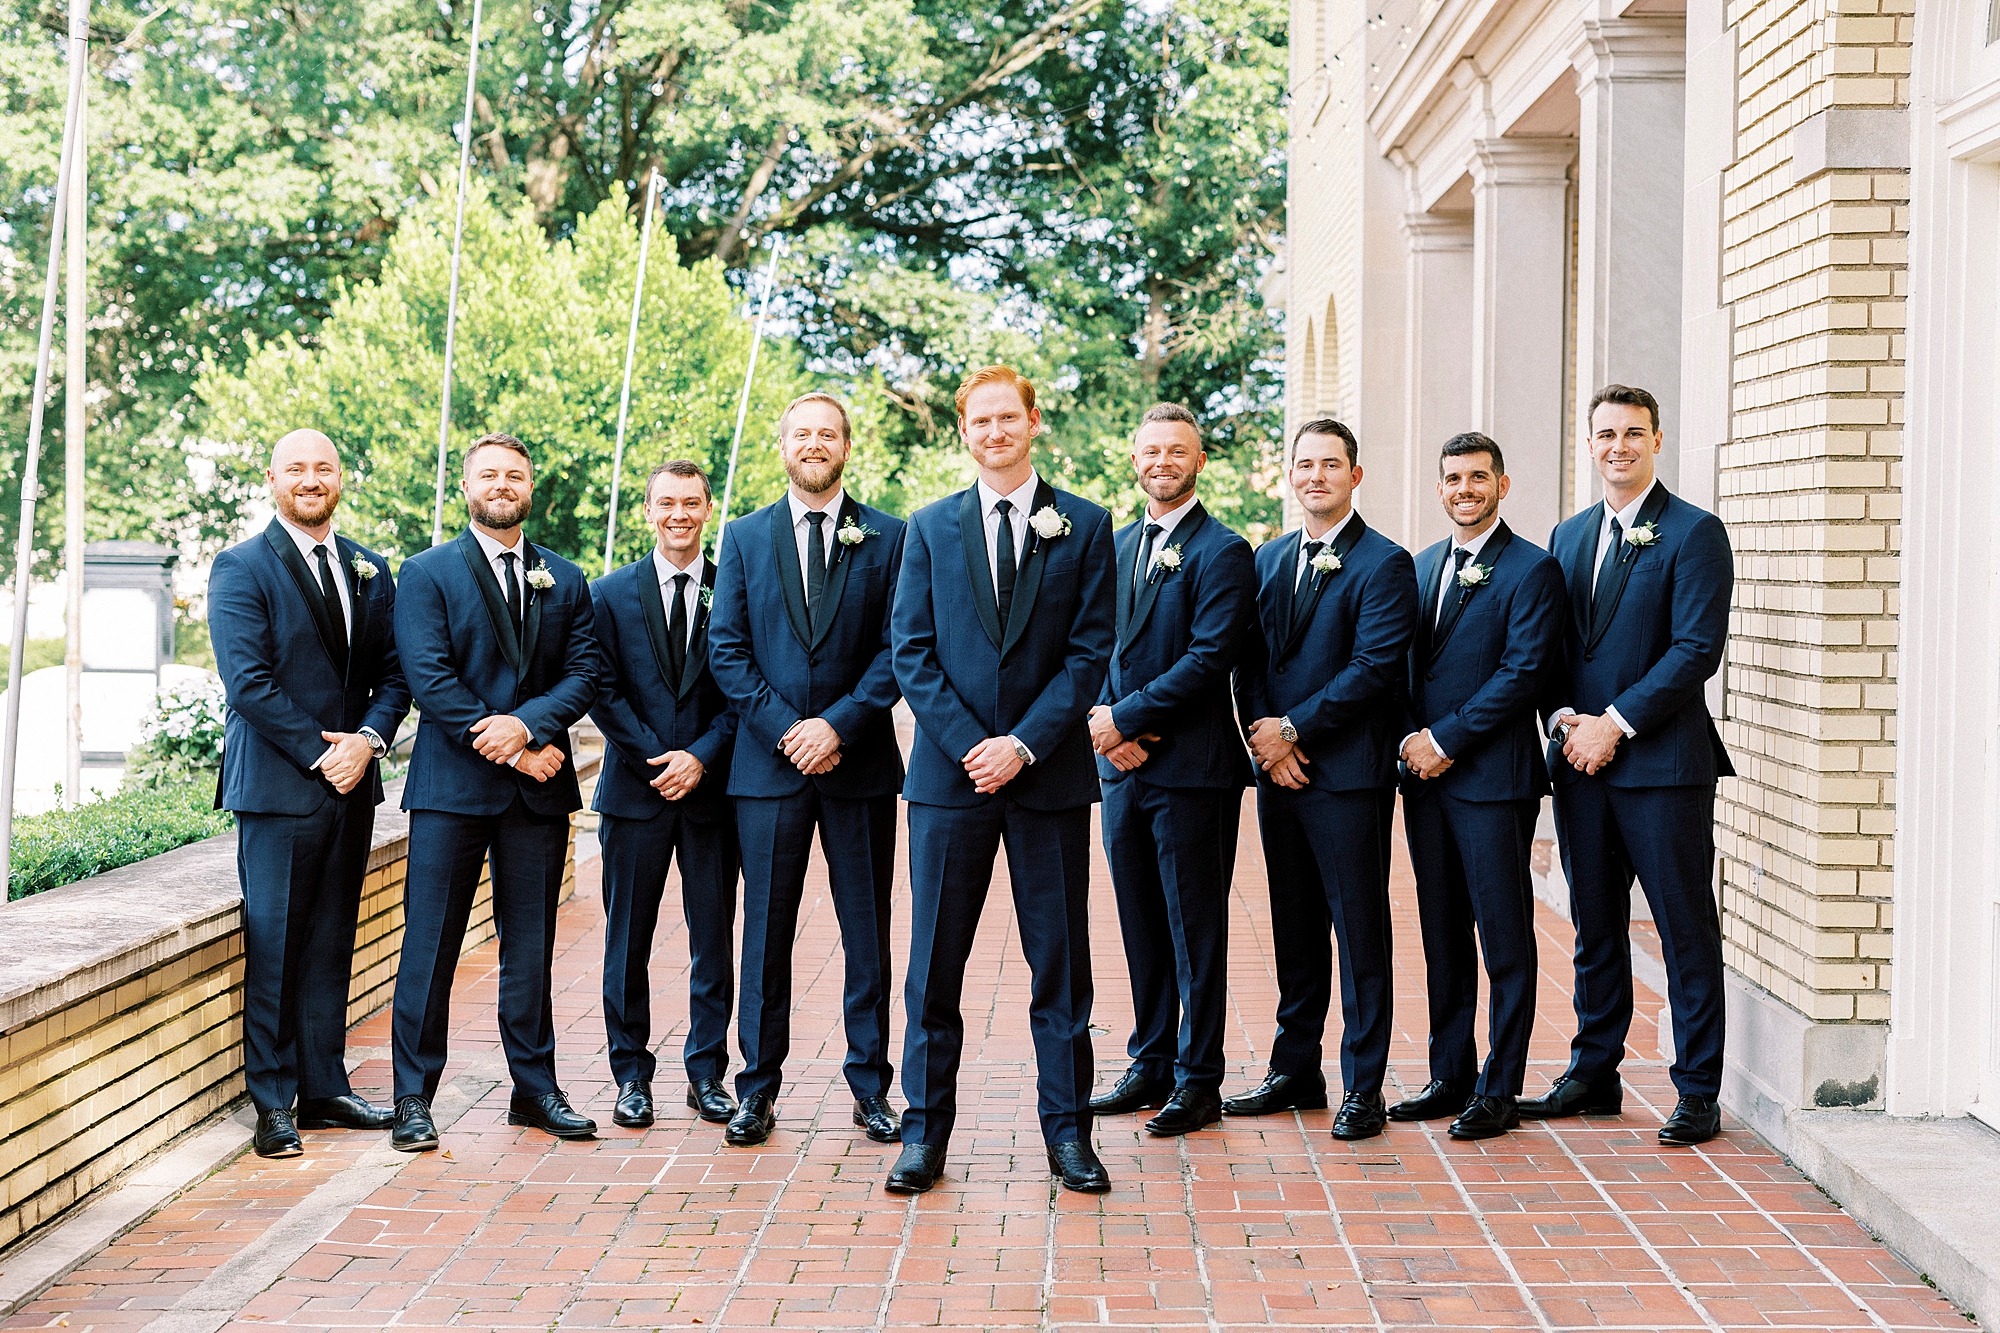 groom stands with groomsmen in navy suits on brick patio outside Separk Mansion